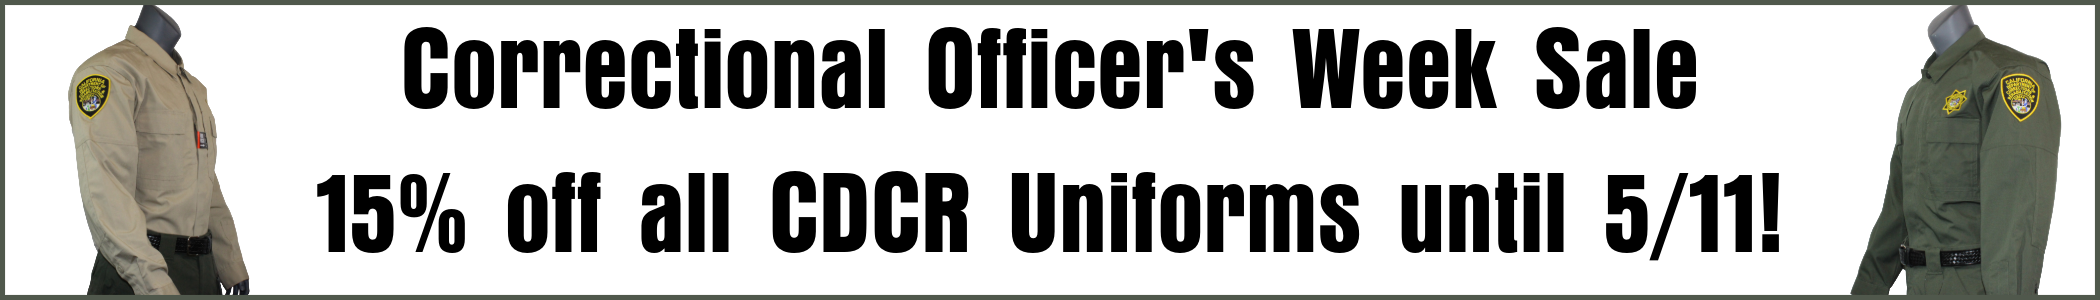 correctional officer's week sale